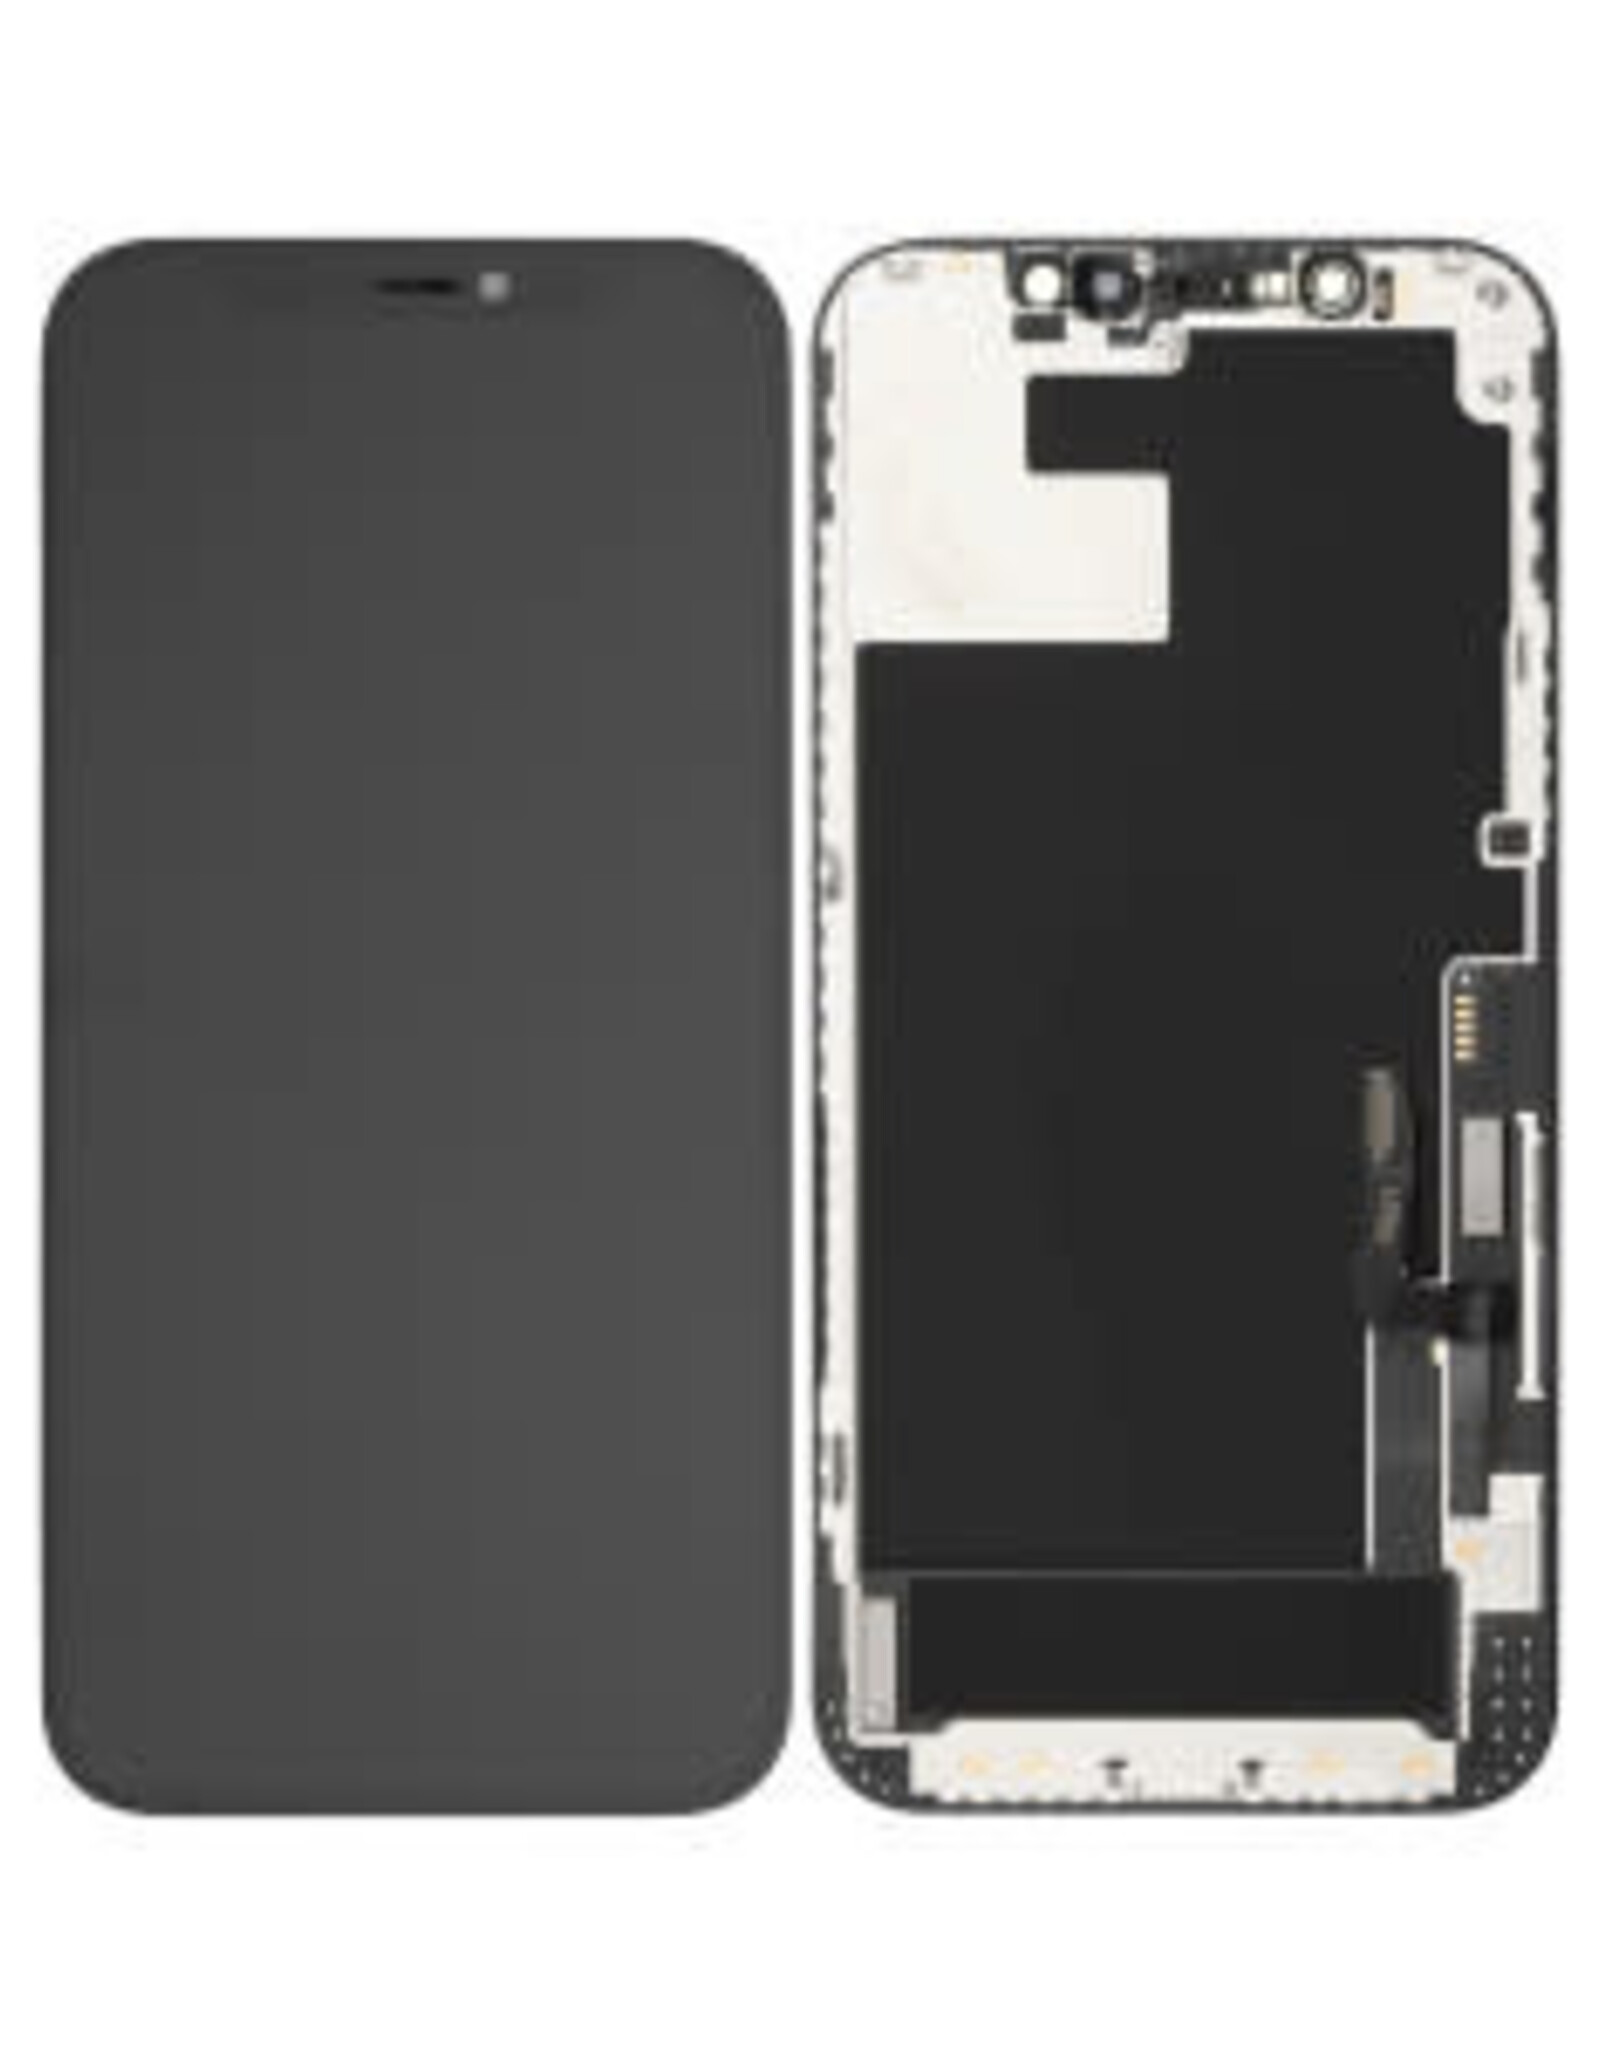 Apple iPhone 12/12 Pro LCD Screen Replacement (parts)